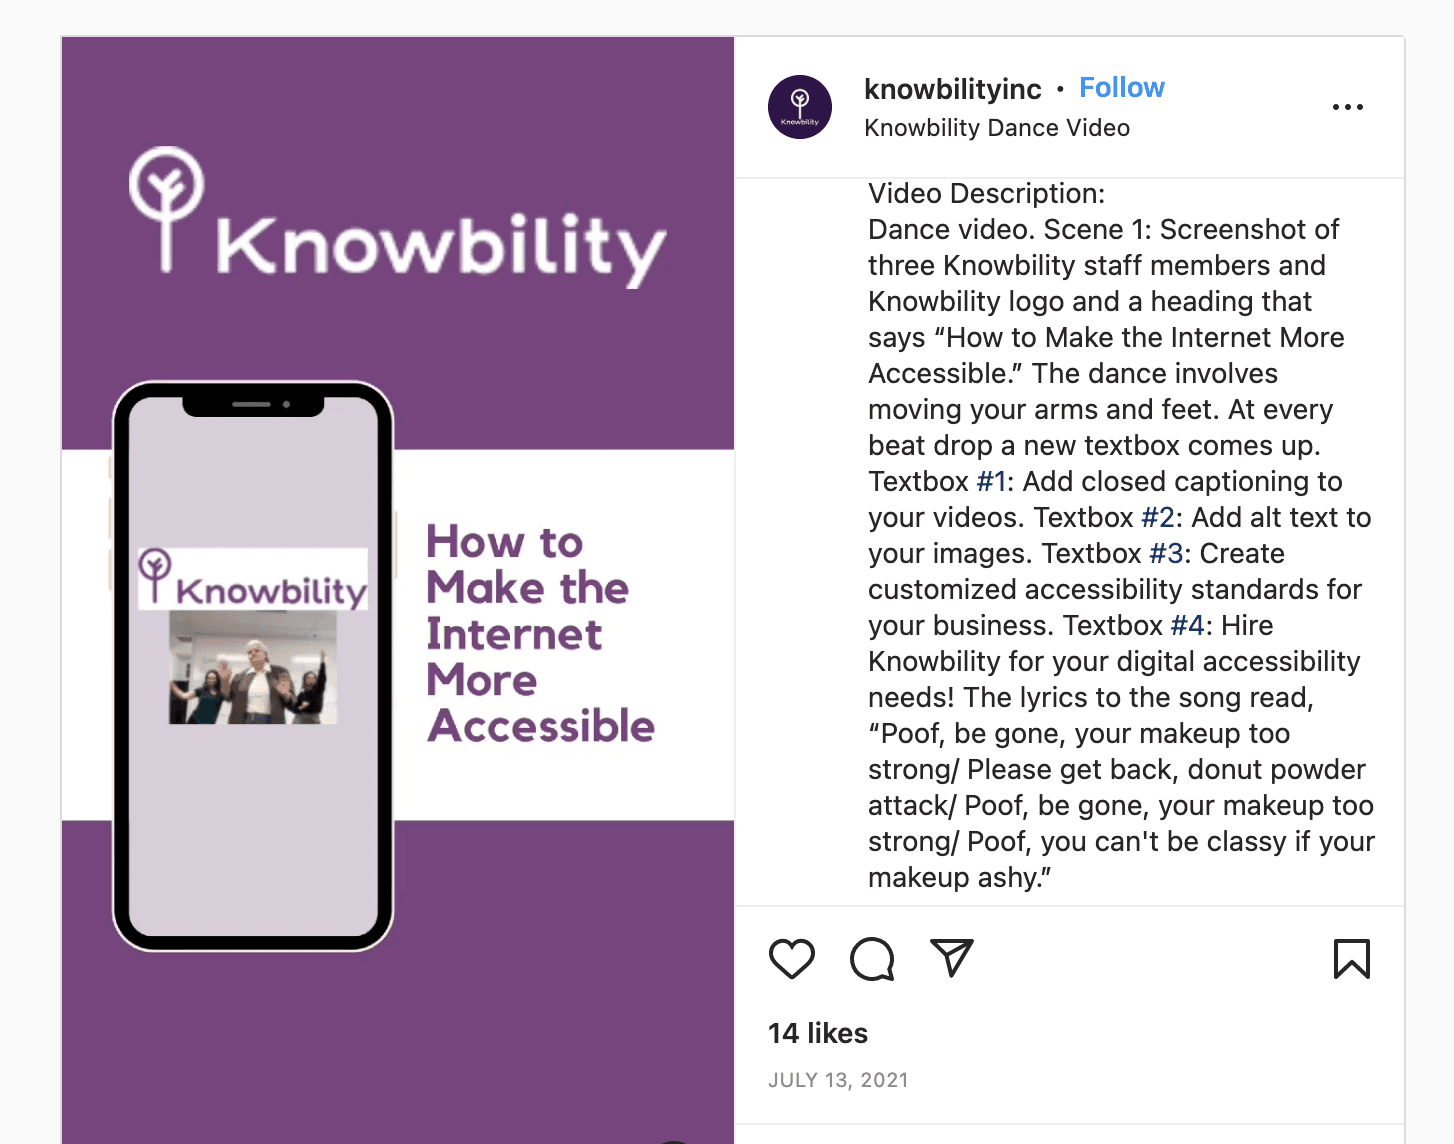 Screenshot of a Knowbility instagram post on how to make the internet more accessible.